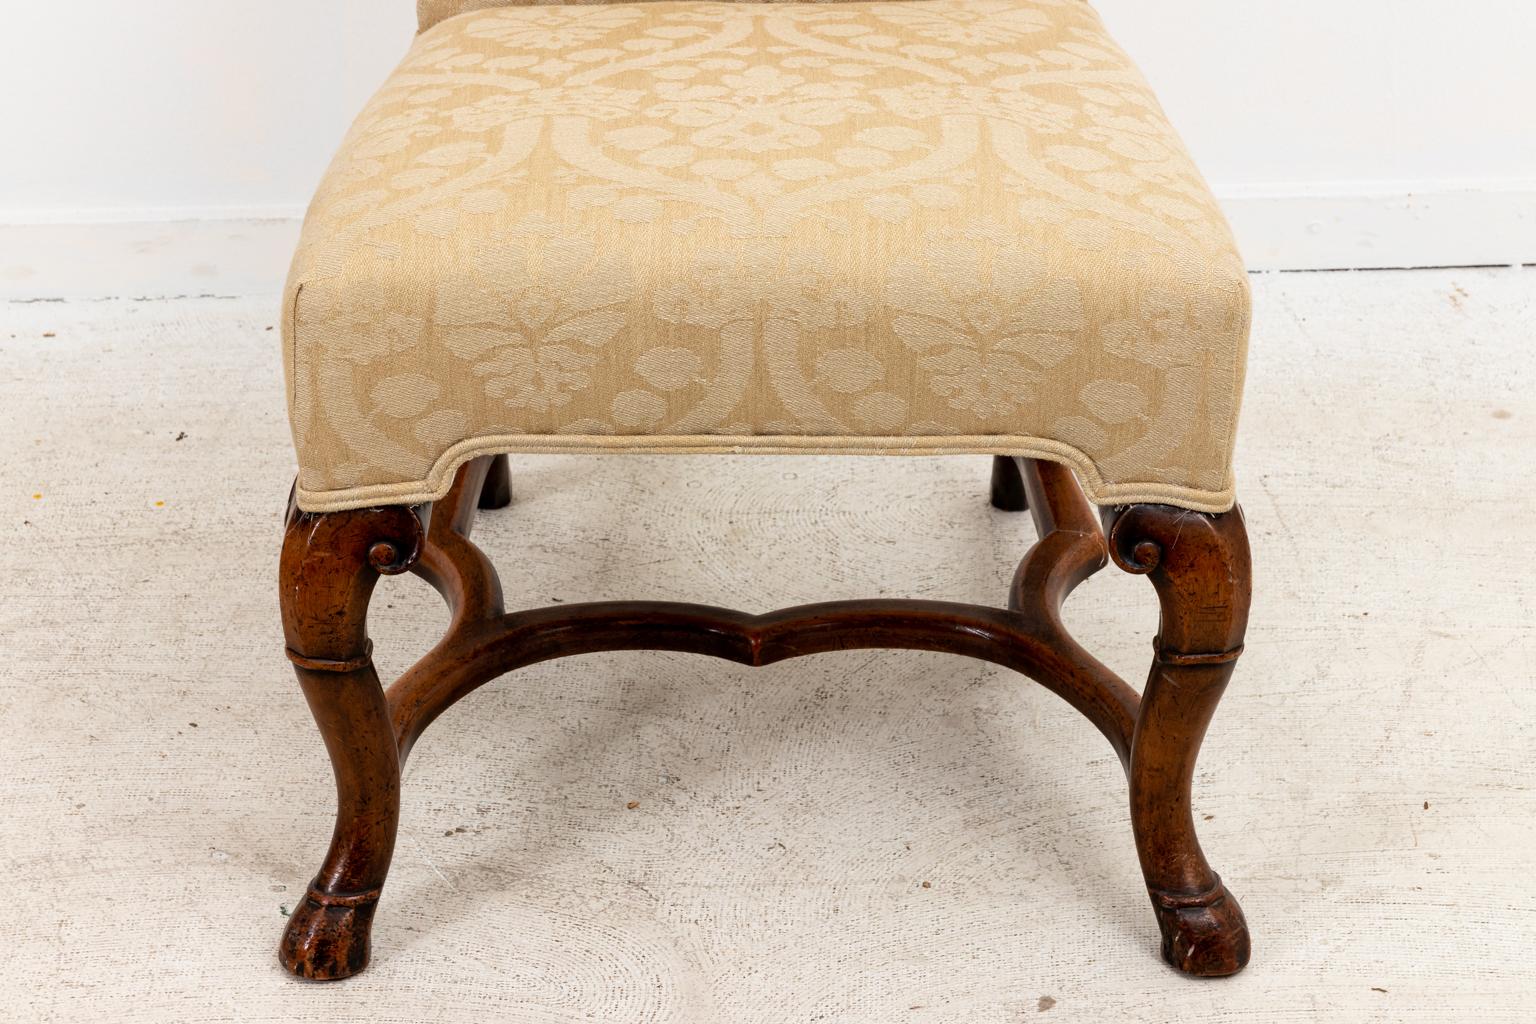 Circa 1980s set of four English Queen Anne style side chairs upholstered in a Rogers & Goffington Linen Damask fabric with carved legs shaped like horse hooves and bottom H-shaped cross stretchers. Made in the United States. Please note of wear